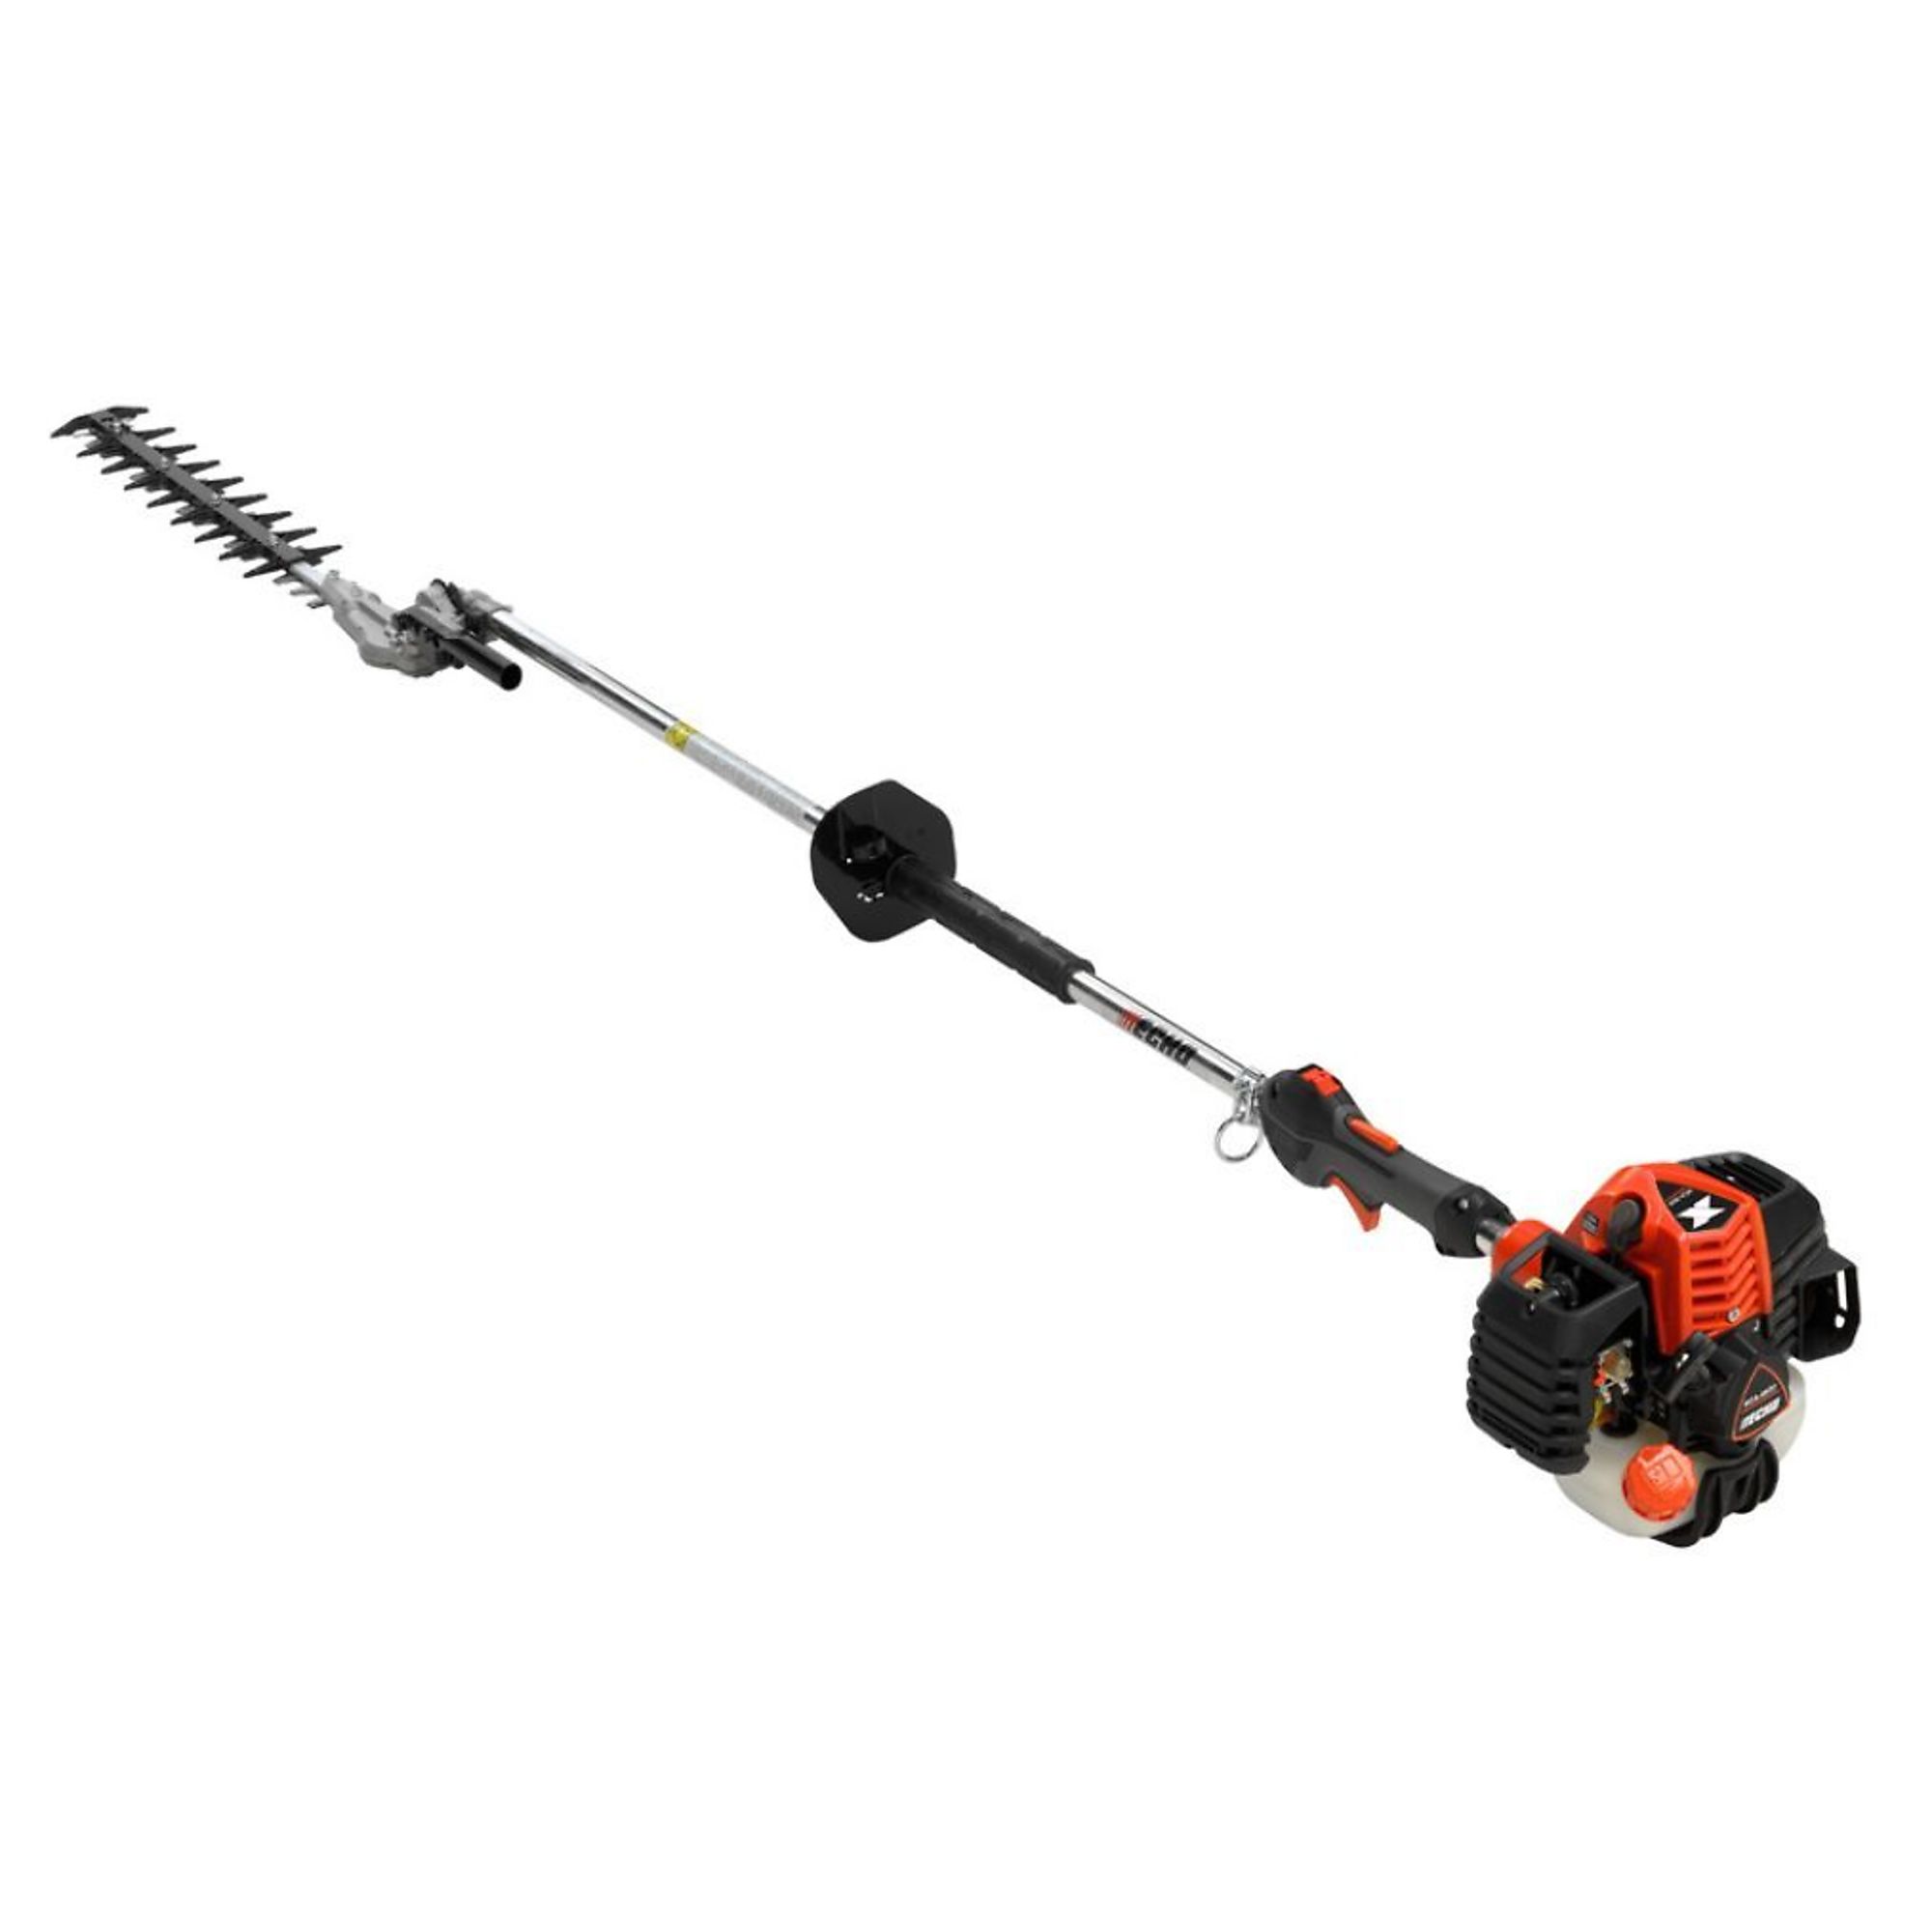 ECHO X Series, Gas-Powered Hedge Trimmer, Blade Length 21 in, Model HCA-2620